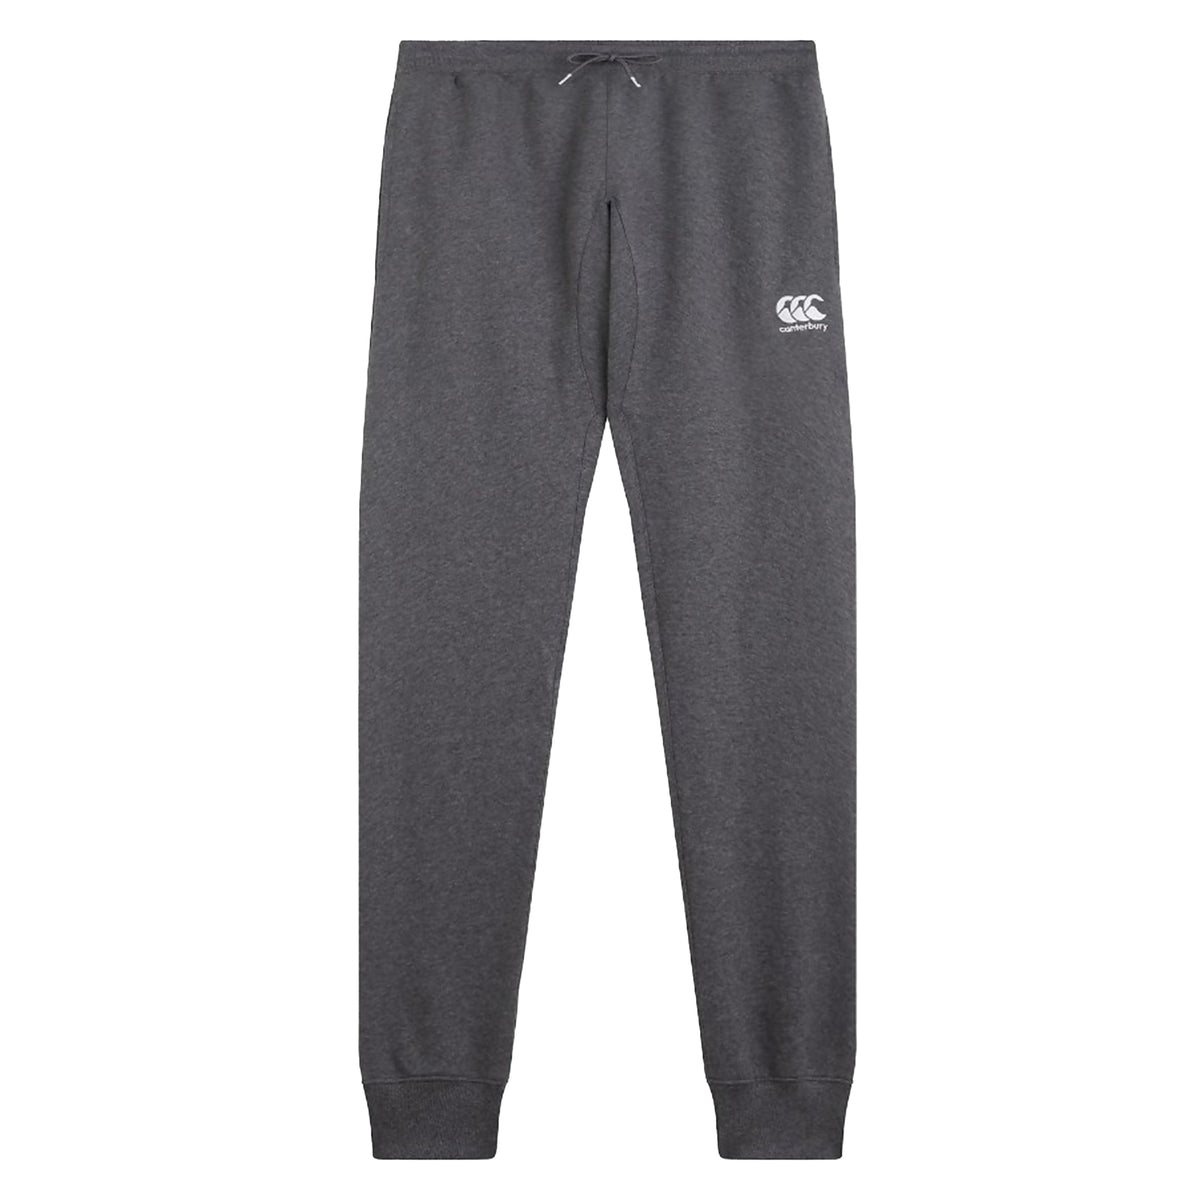 Canterbury Mens Tapered Fleece Cuff Pant: Charcoal Marl